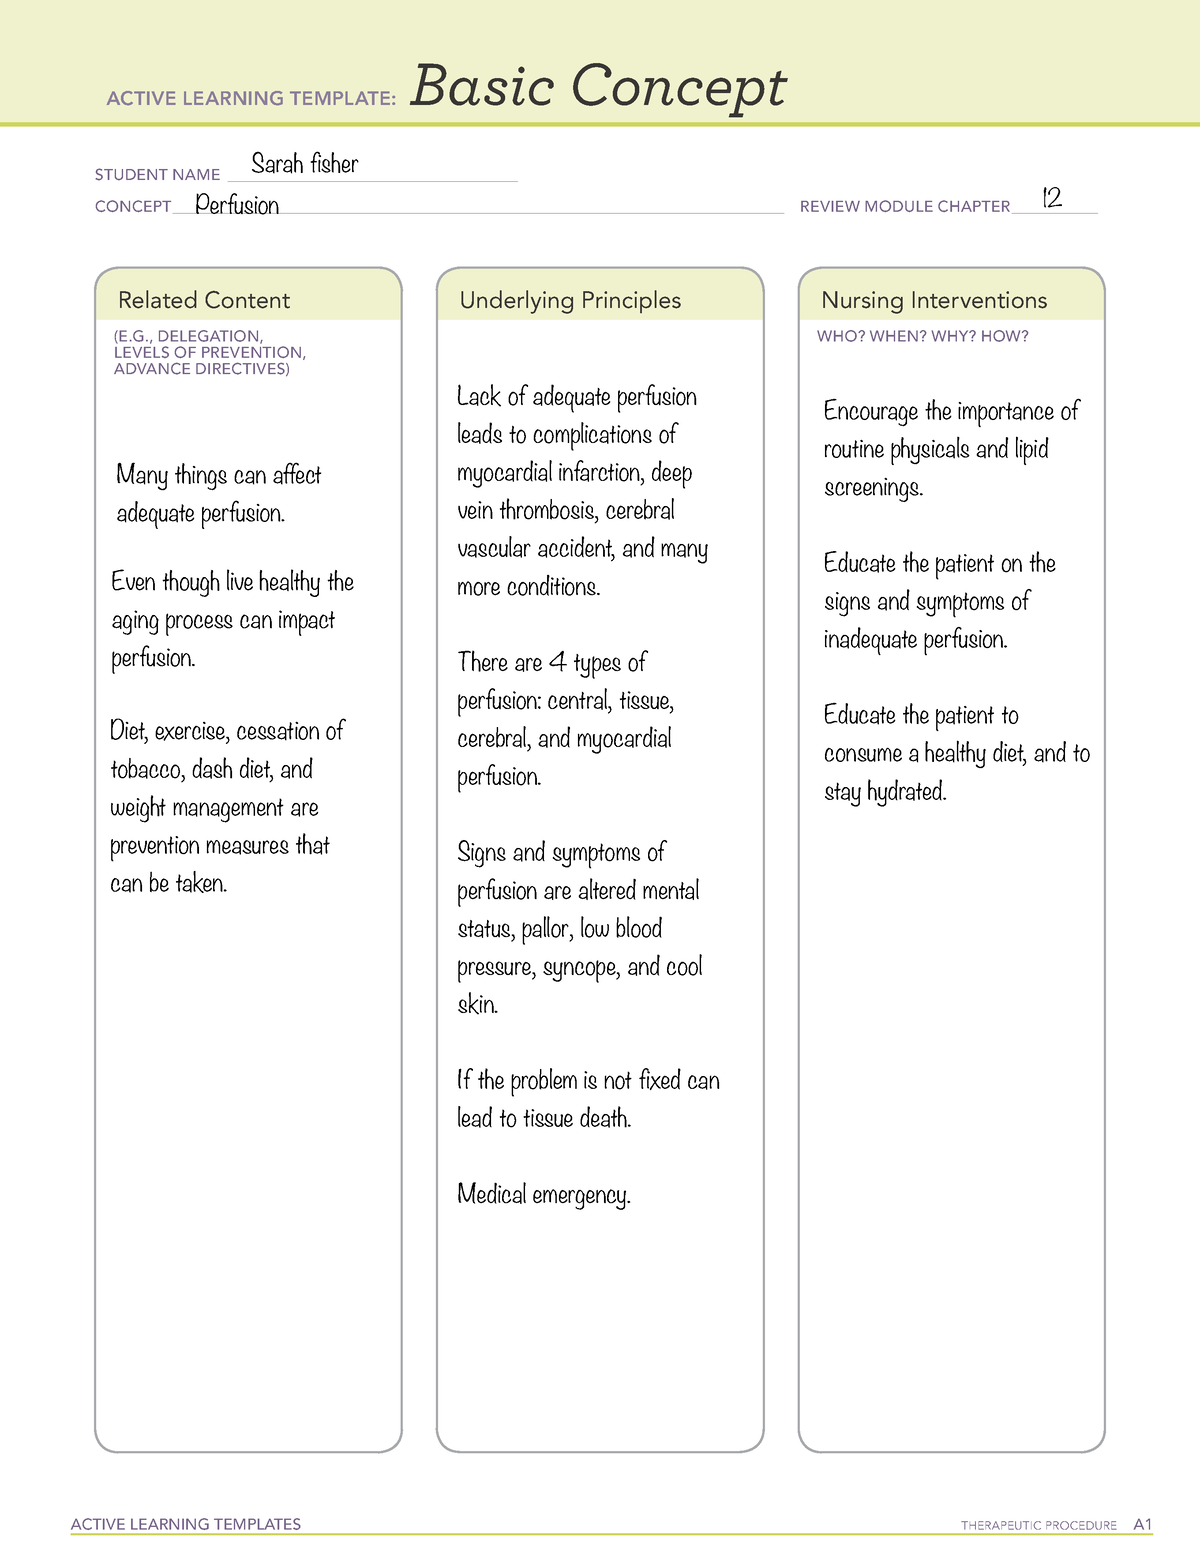 Basic Concept-Basic Care and Comfort - ACTIVE LEARNING TEMPLATES